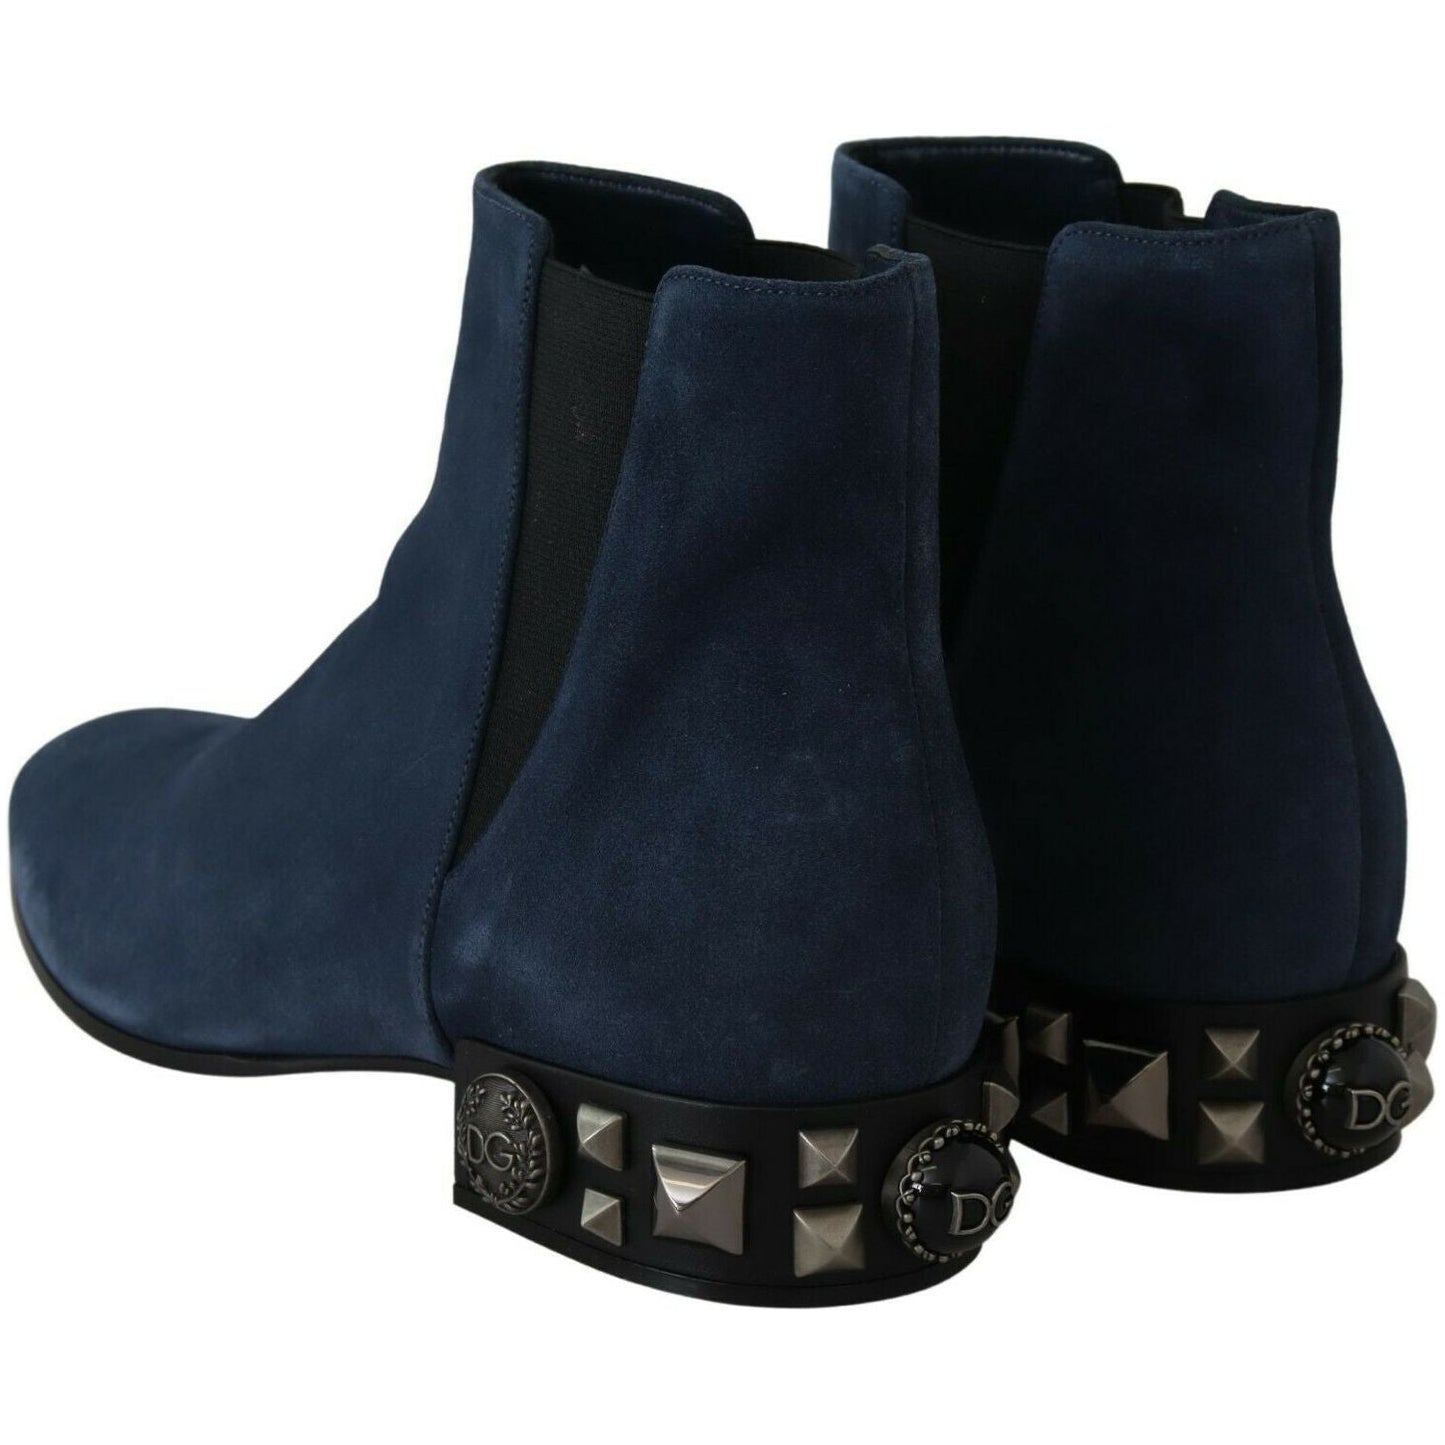 Dolce & Gabbana Chic Blue Suede Mid-Calf Boots with Stud Details WOMAN BOOTS blue-suede-embellished-studded-boots-shoes s-l1600-2022-06-30T120618.227-3f0f255d-773.jpg